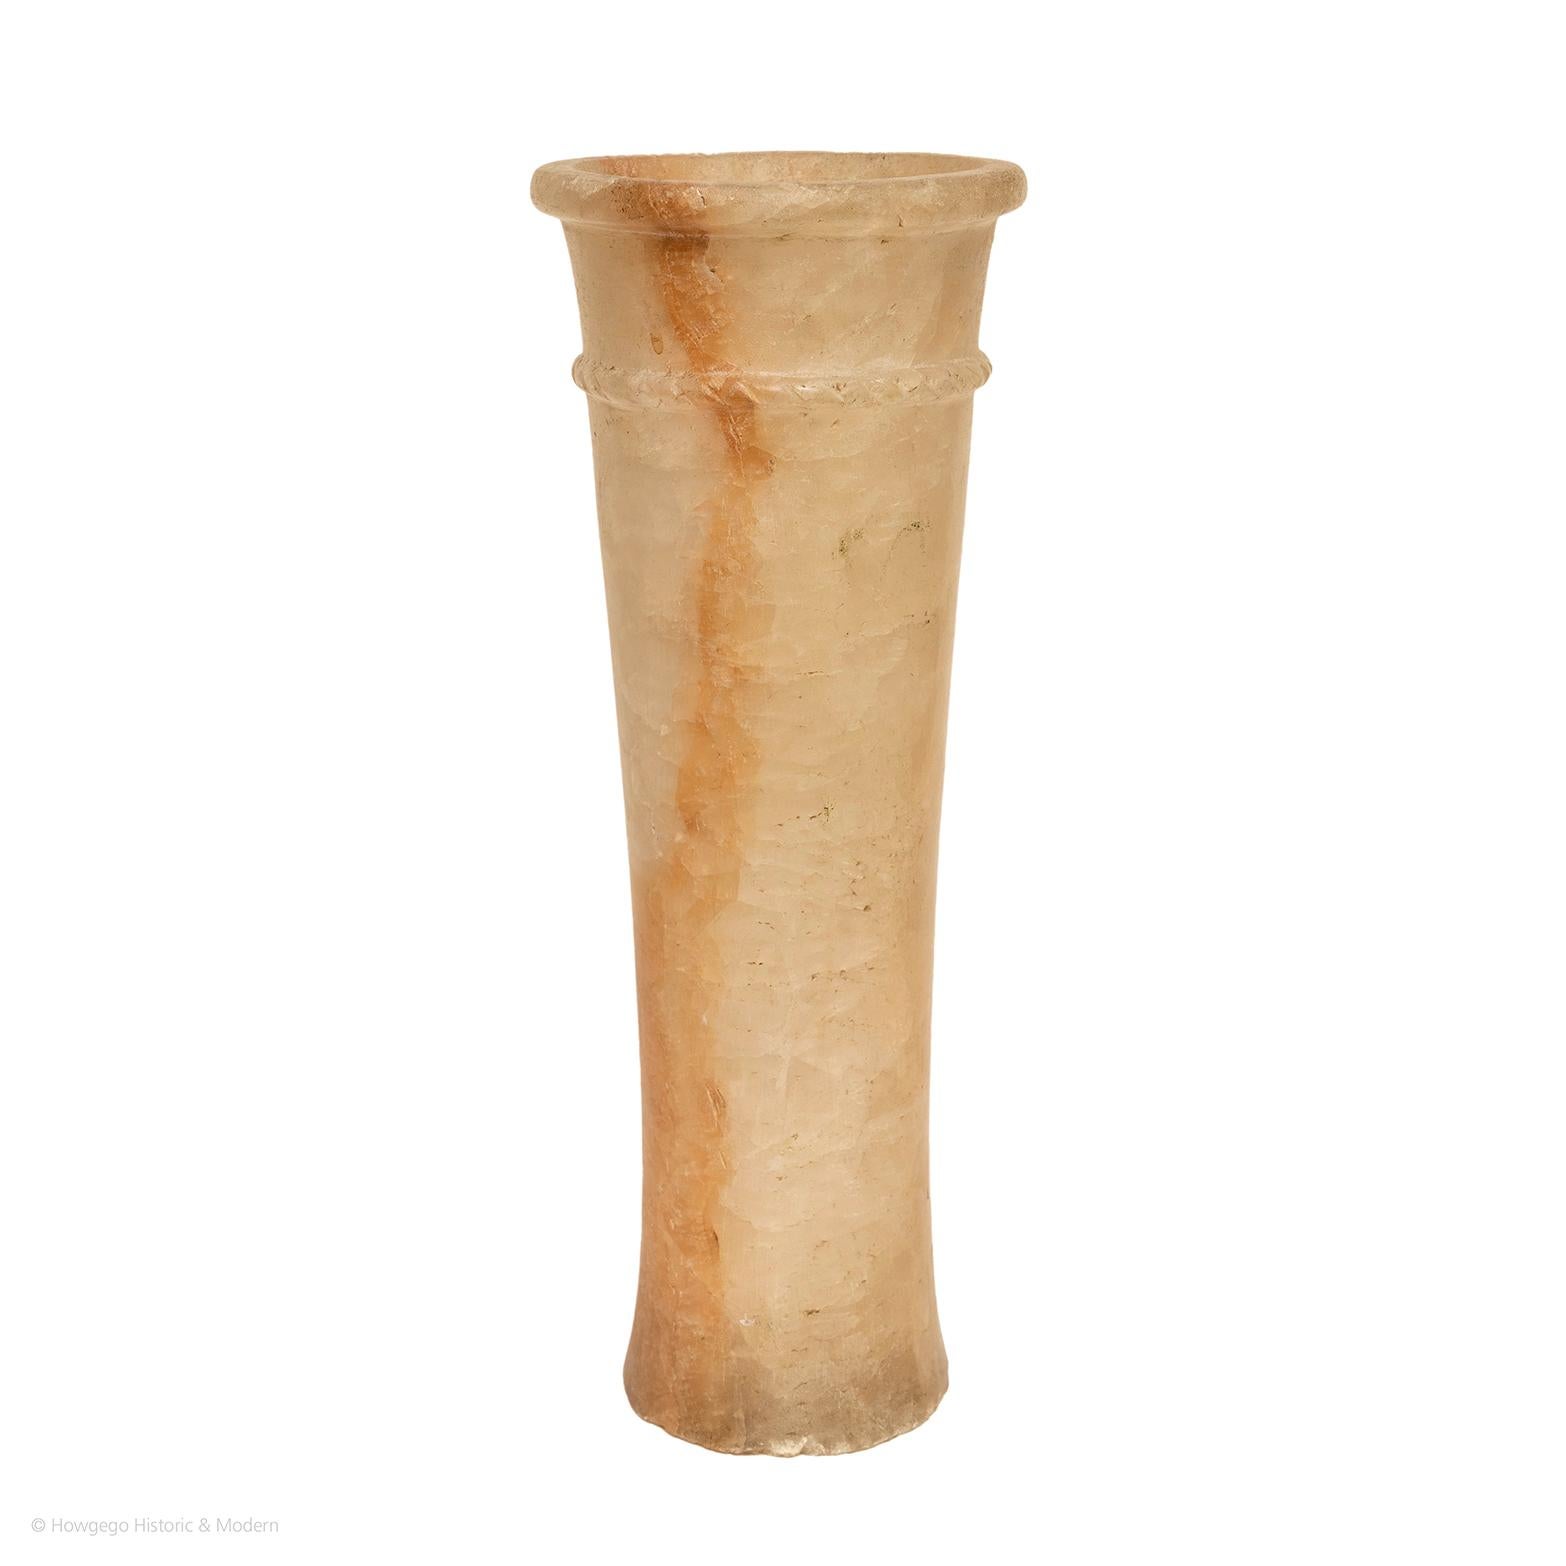 Beautiful translucent figuring 
Cylindrical tapering form with rope border
Egypt

Provenance Drue Heink Collection sold christies lot 166, C jork/ corr
Measures: diameter 15cm., 6